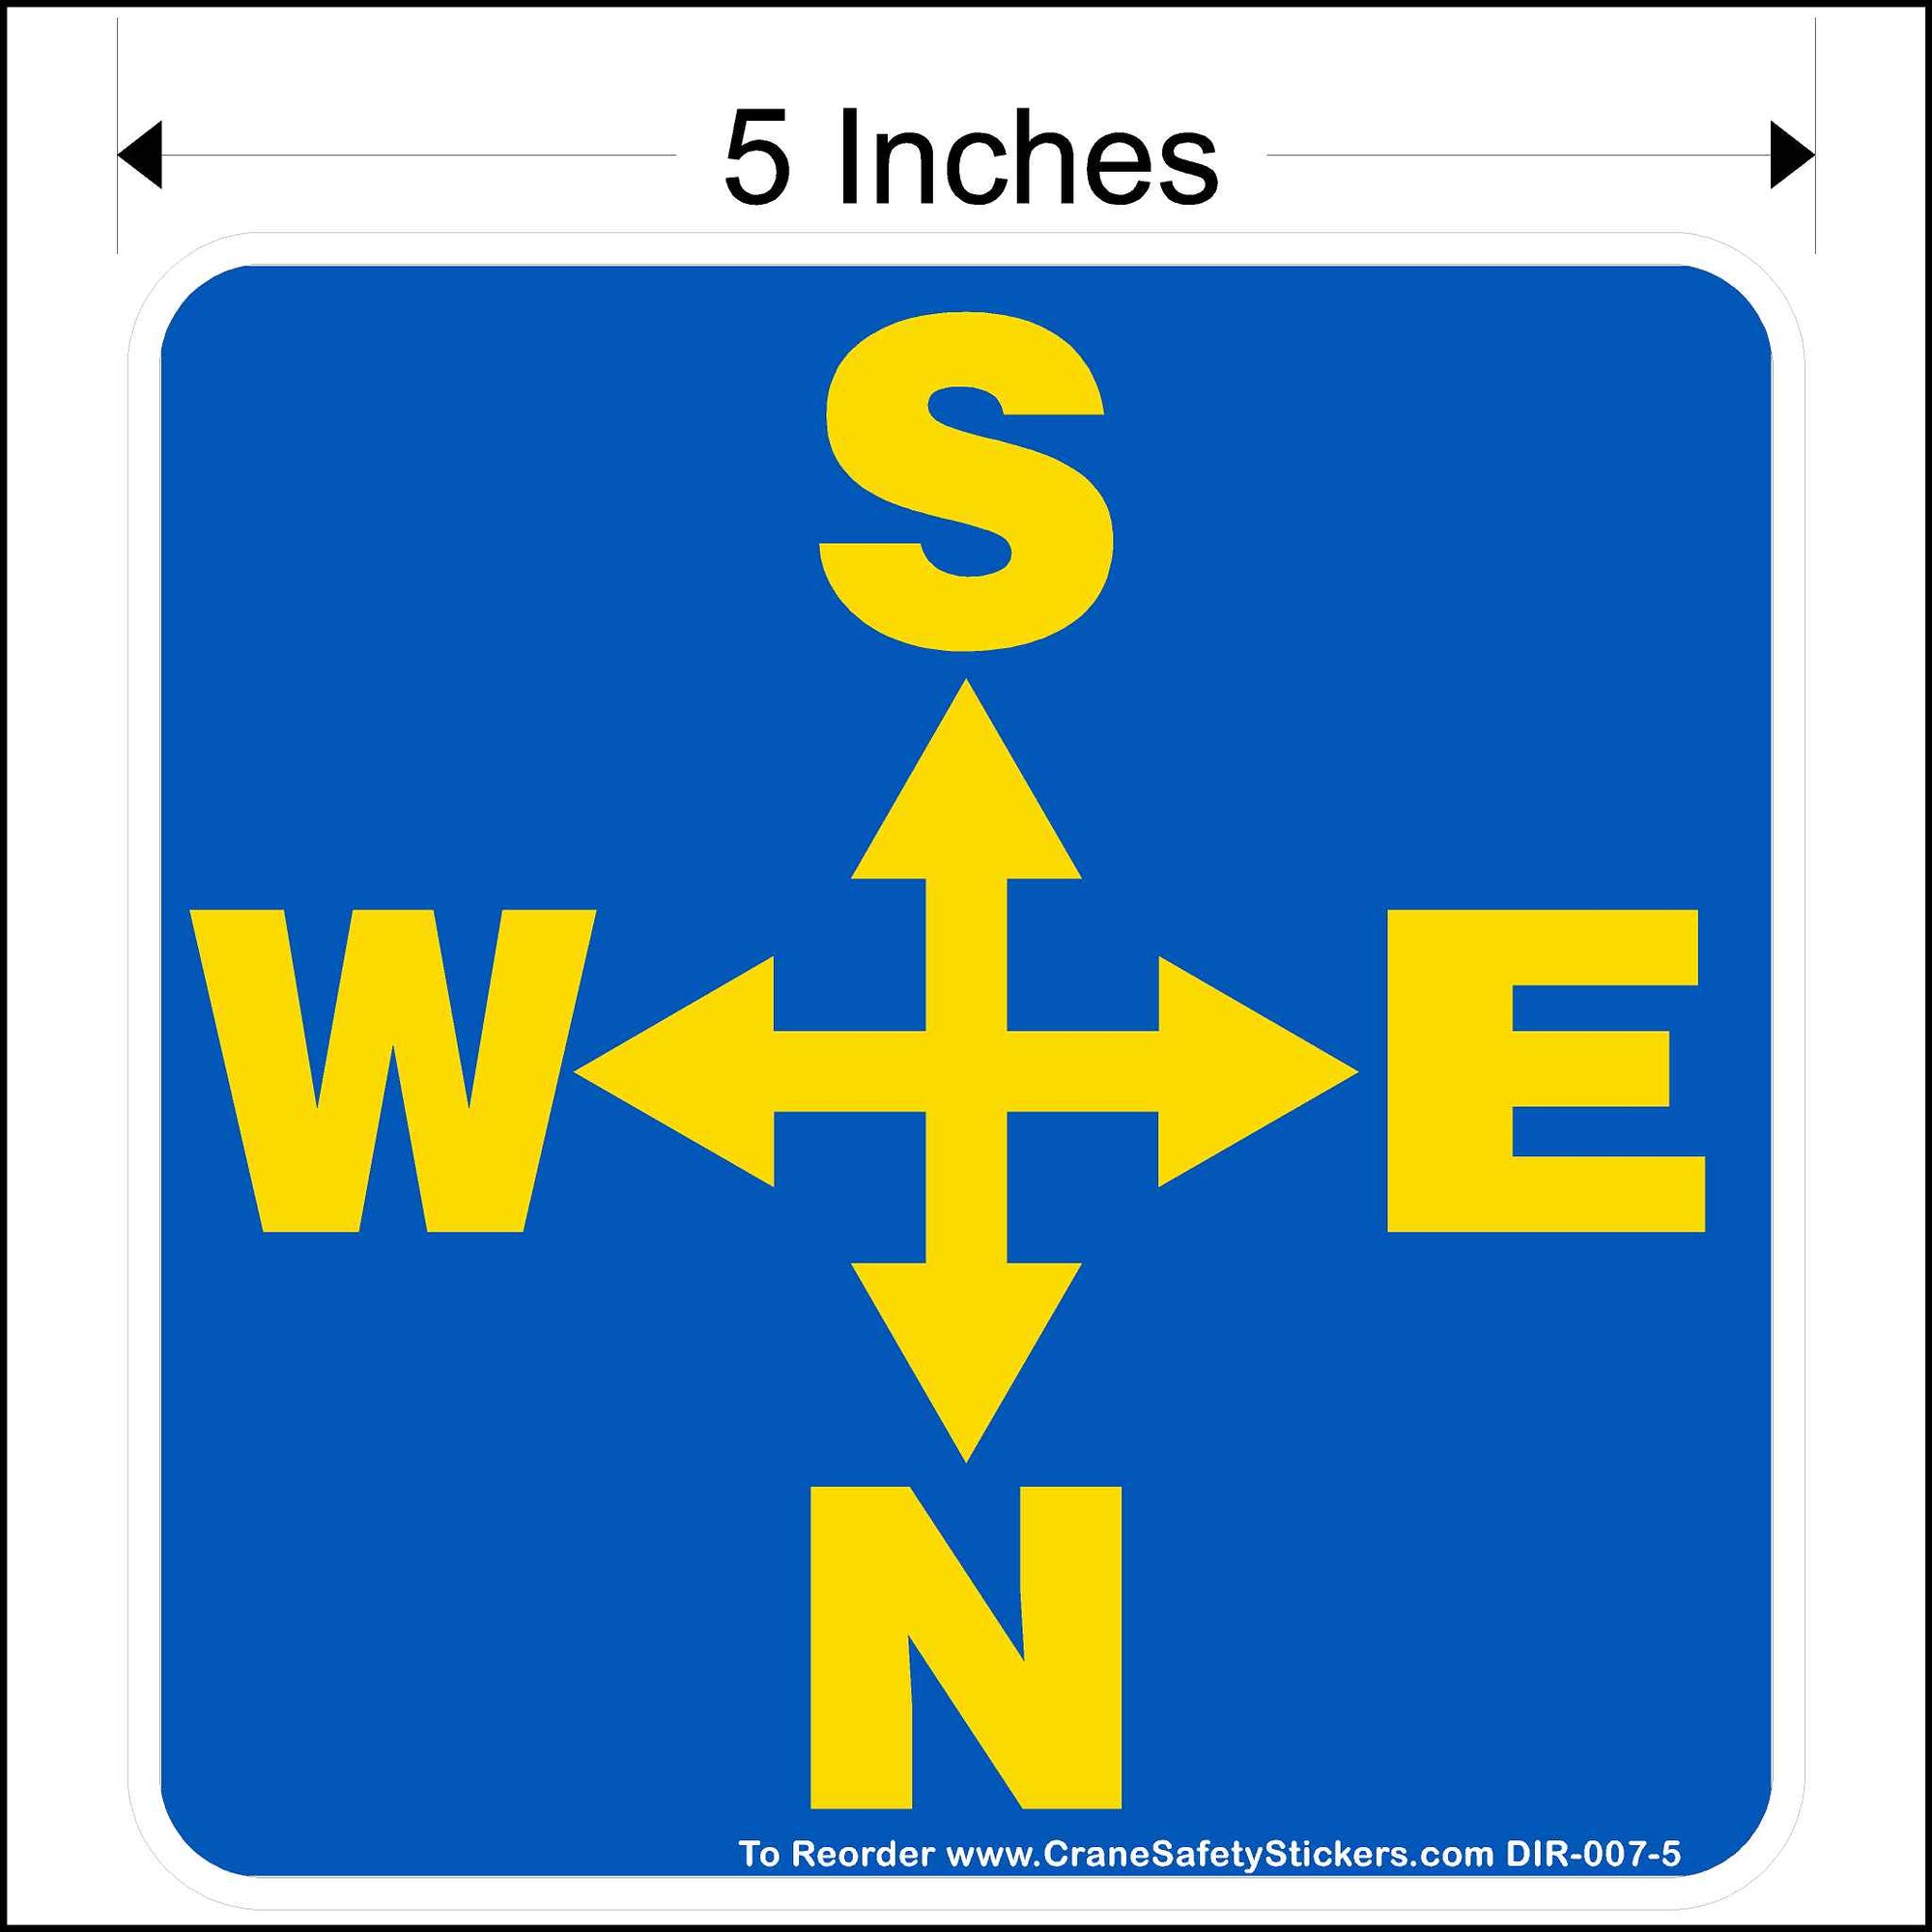 Five inch overhead crane decal printed with yellow south, notrth, east, and west arrows on a blue background.